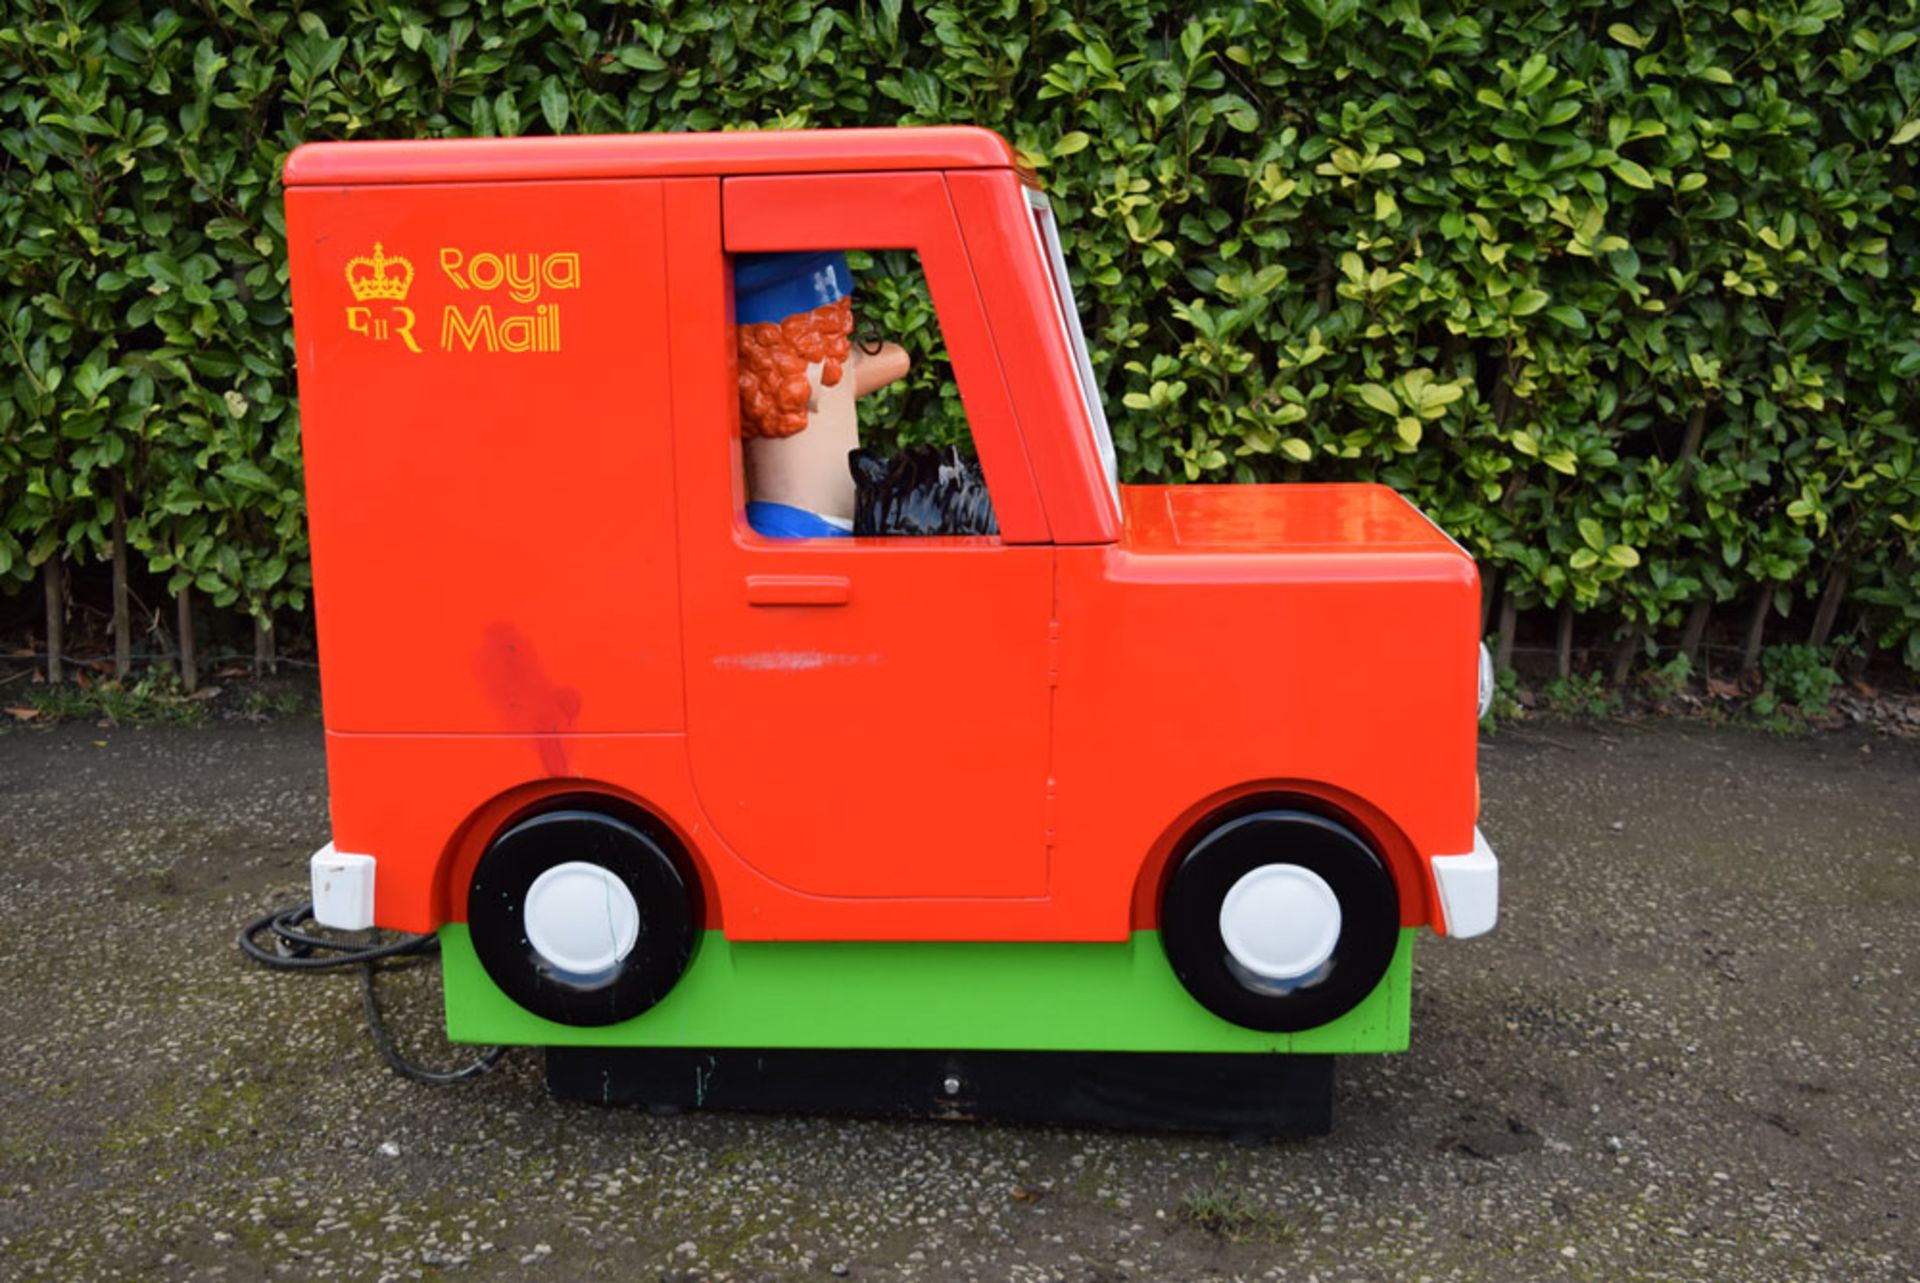 Postman Pat Child's Coin Operated Ride On Arcade Machine. - Image 2 of 3